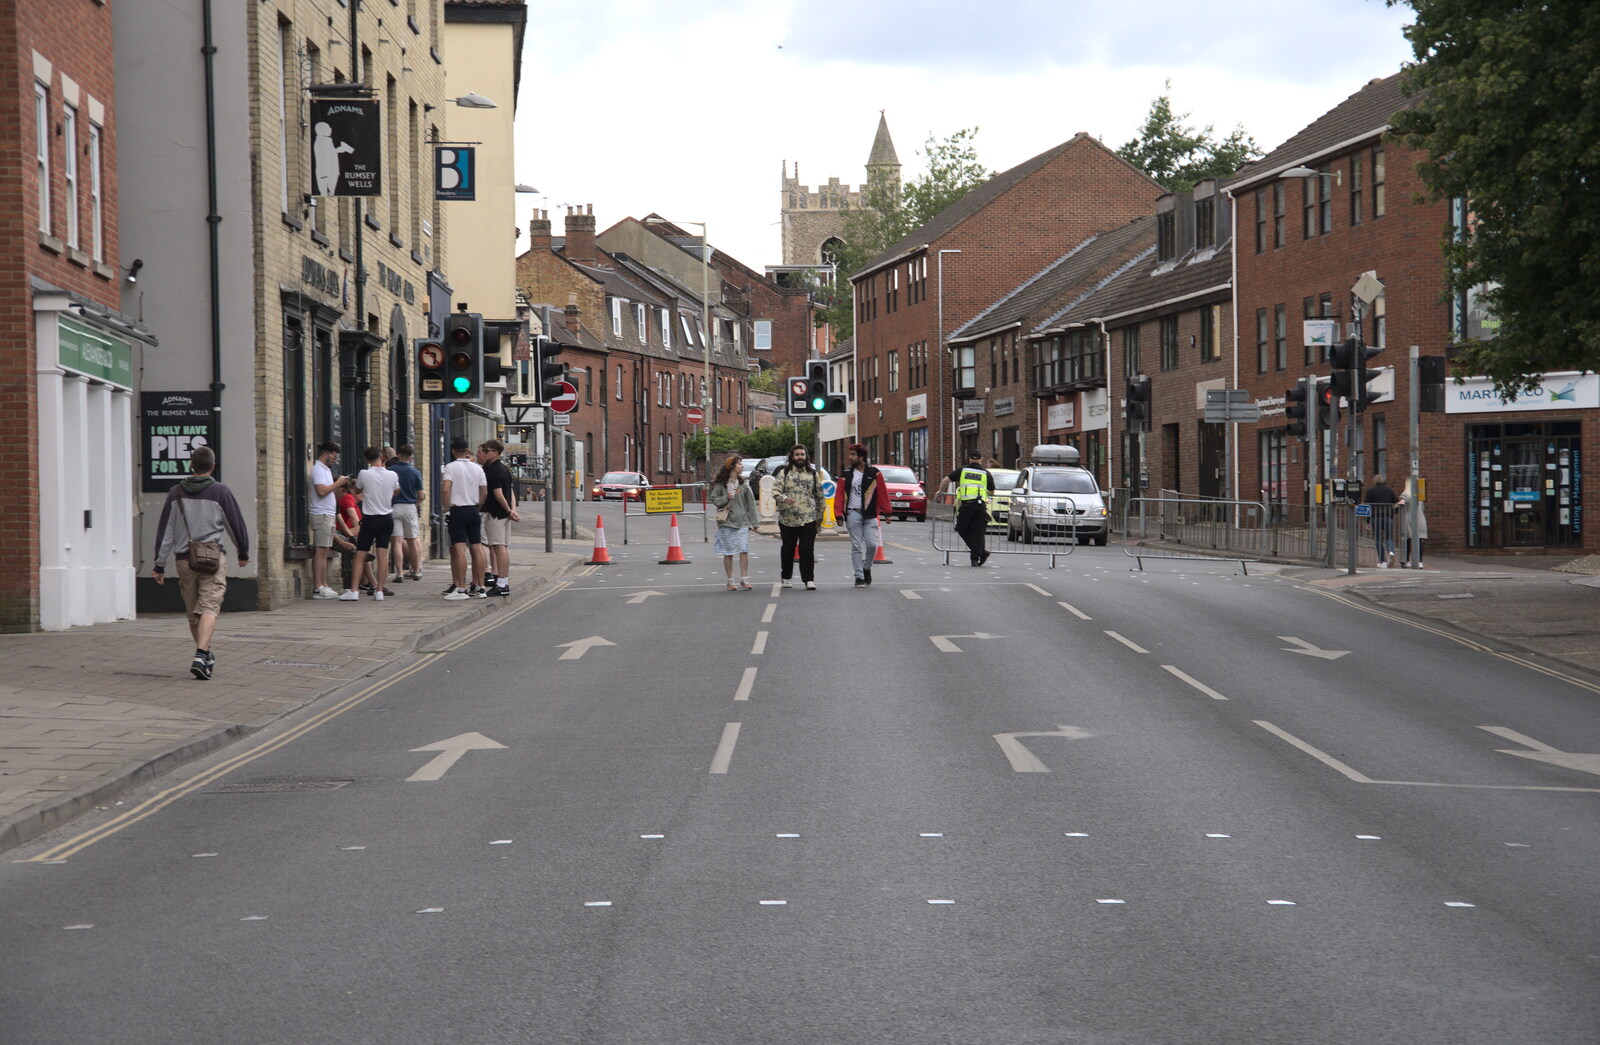 St. Andrew's Street is closed off from The Lord Mayor's Procession, Norwich, Norfolk - 2nd July 2022